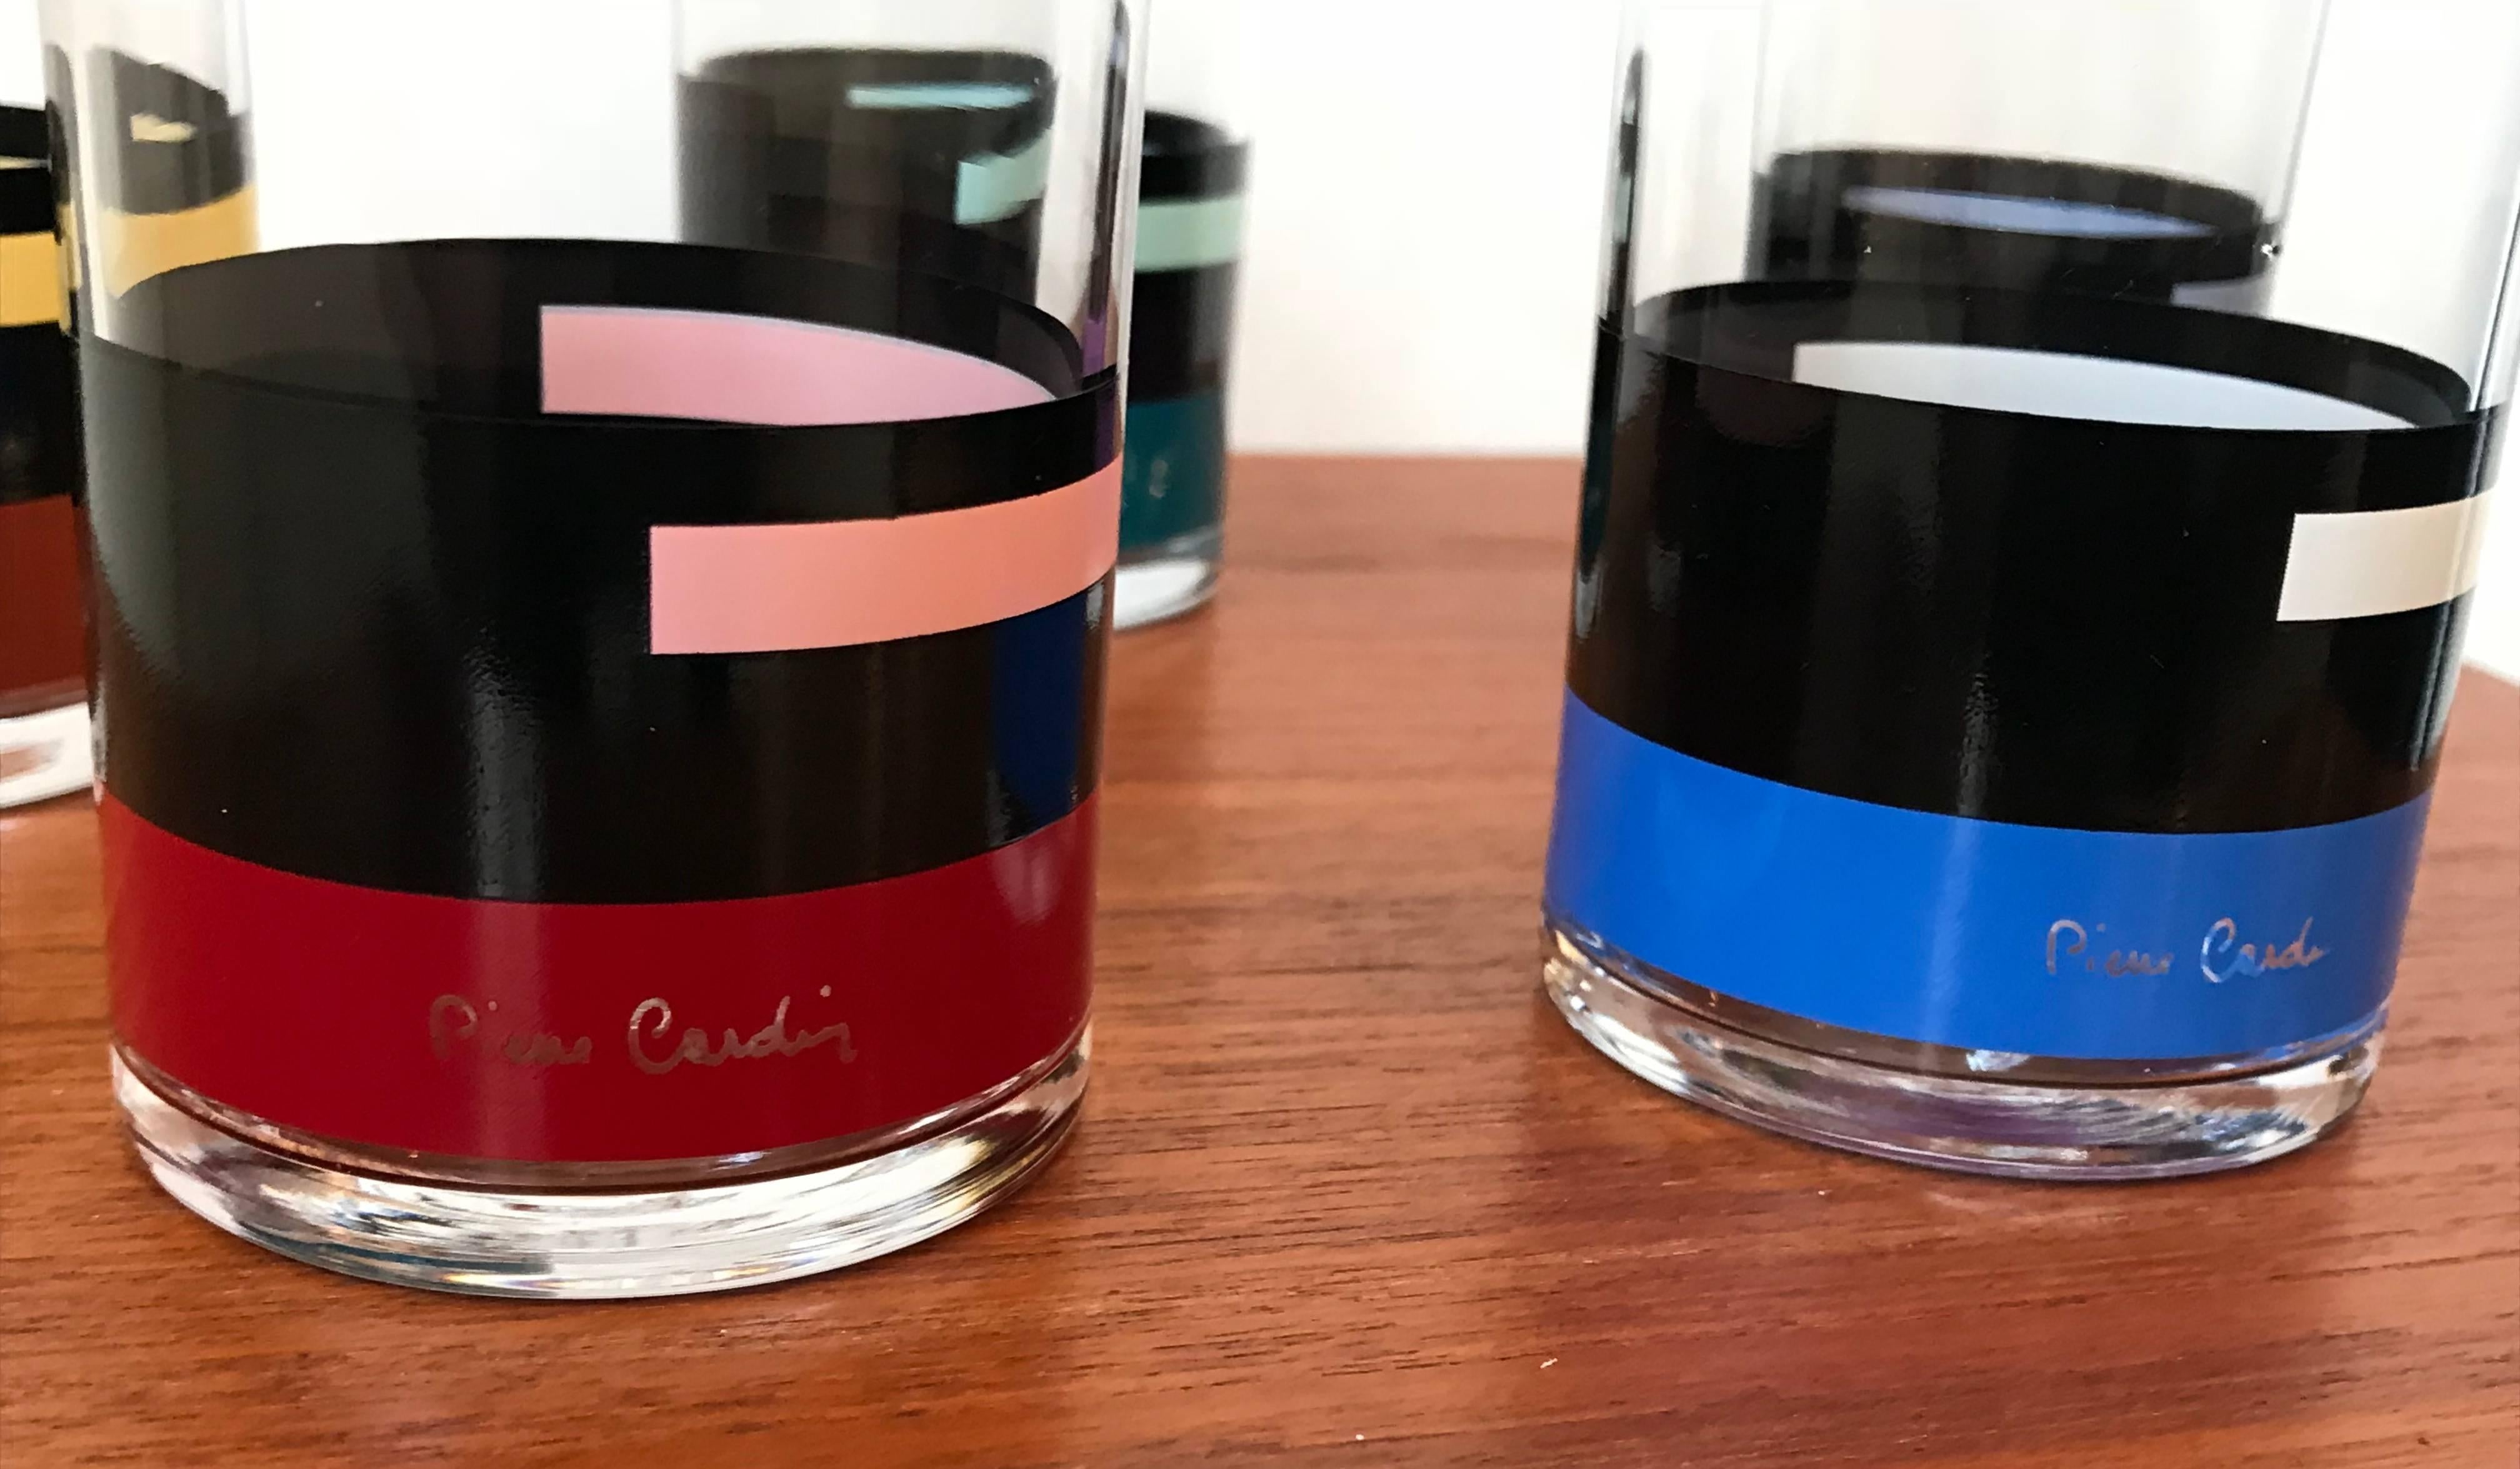 New old stock in original box, rare set of five Pierre Cardin cocktail glasses. Made in Japan.